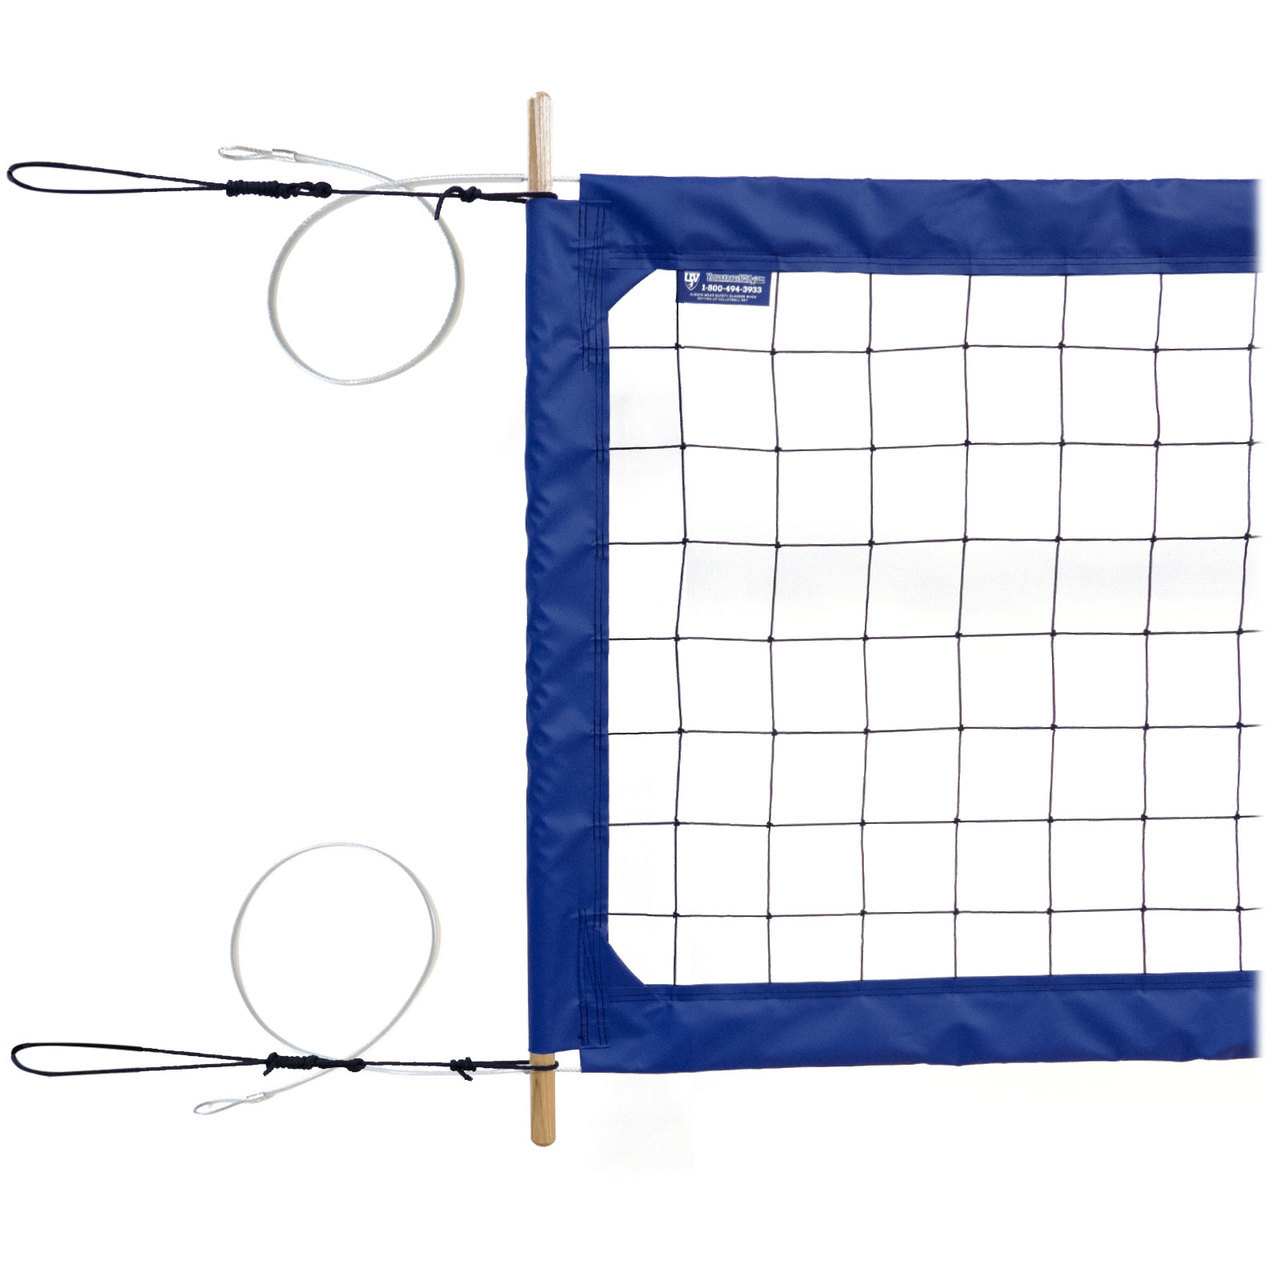 How High Is A Volleyball Net - fasrloop